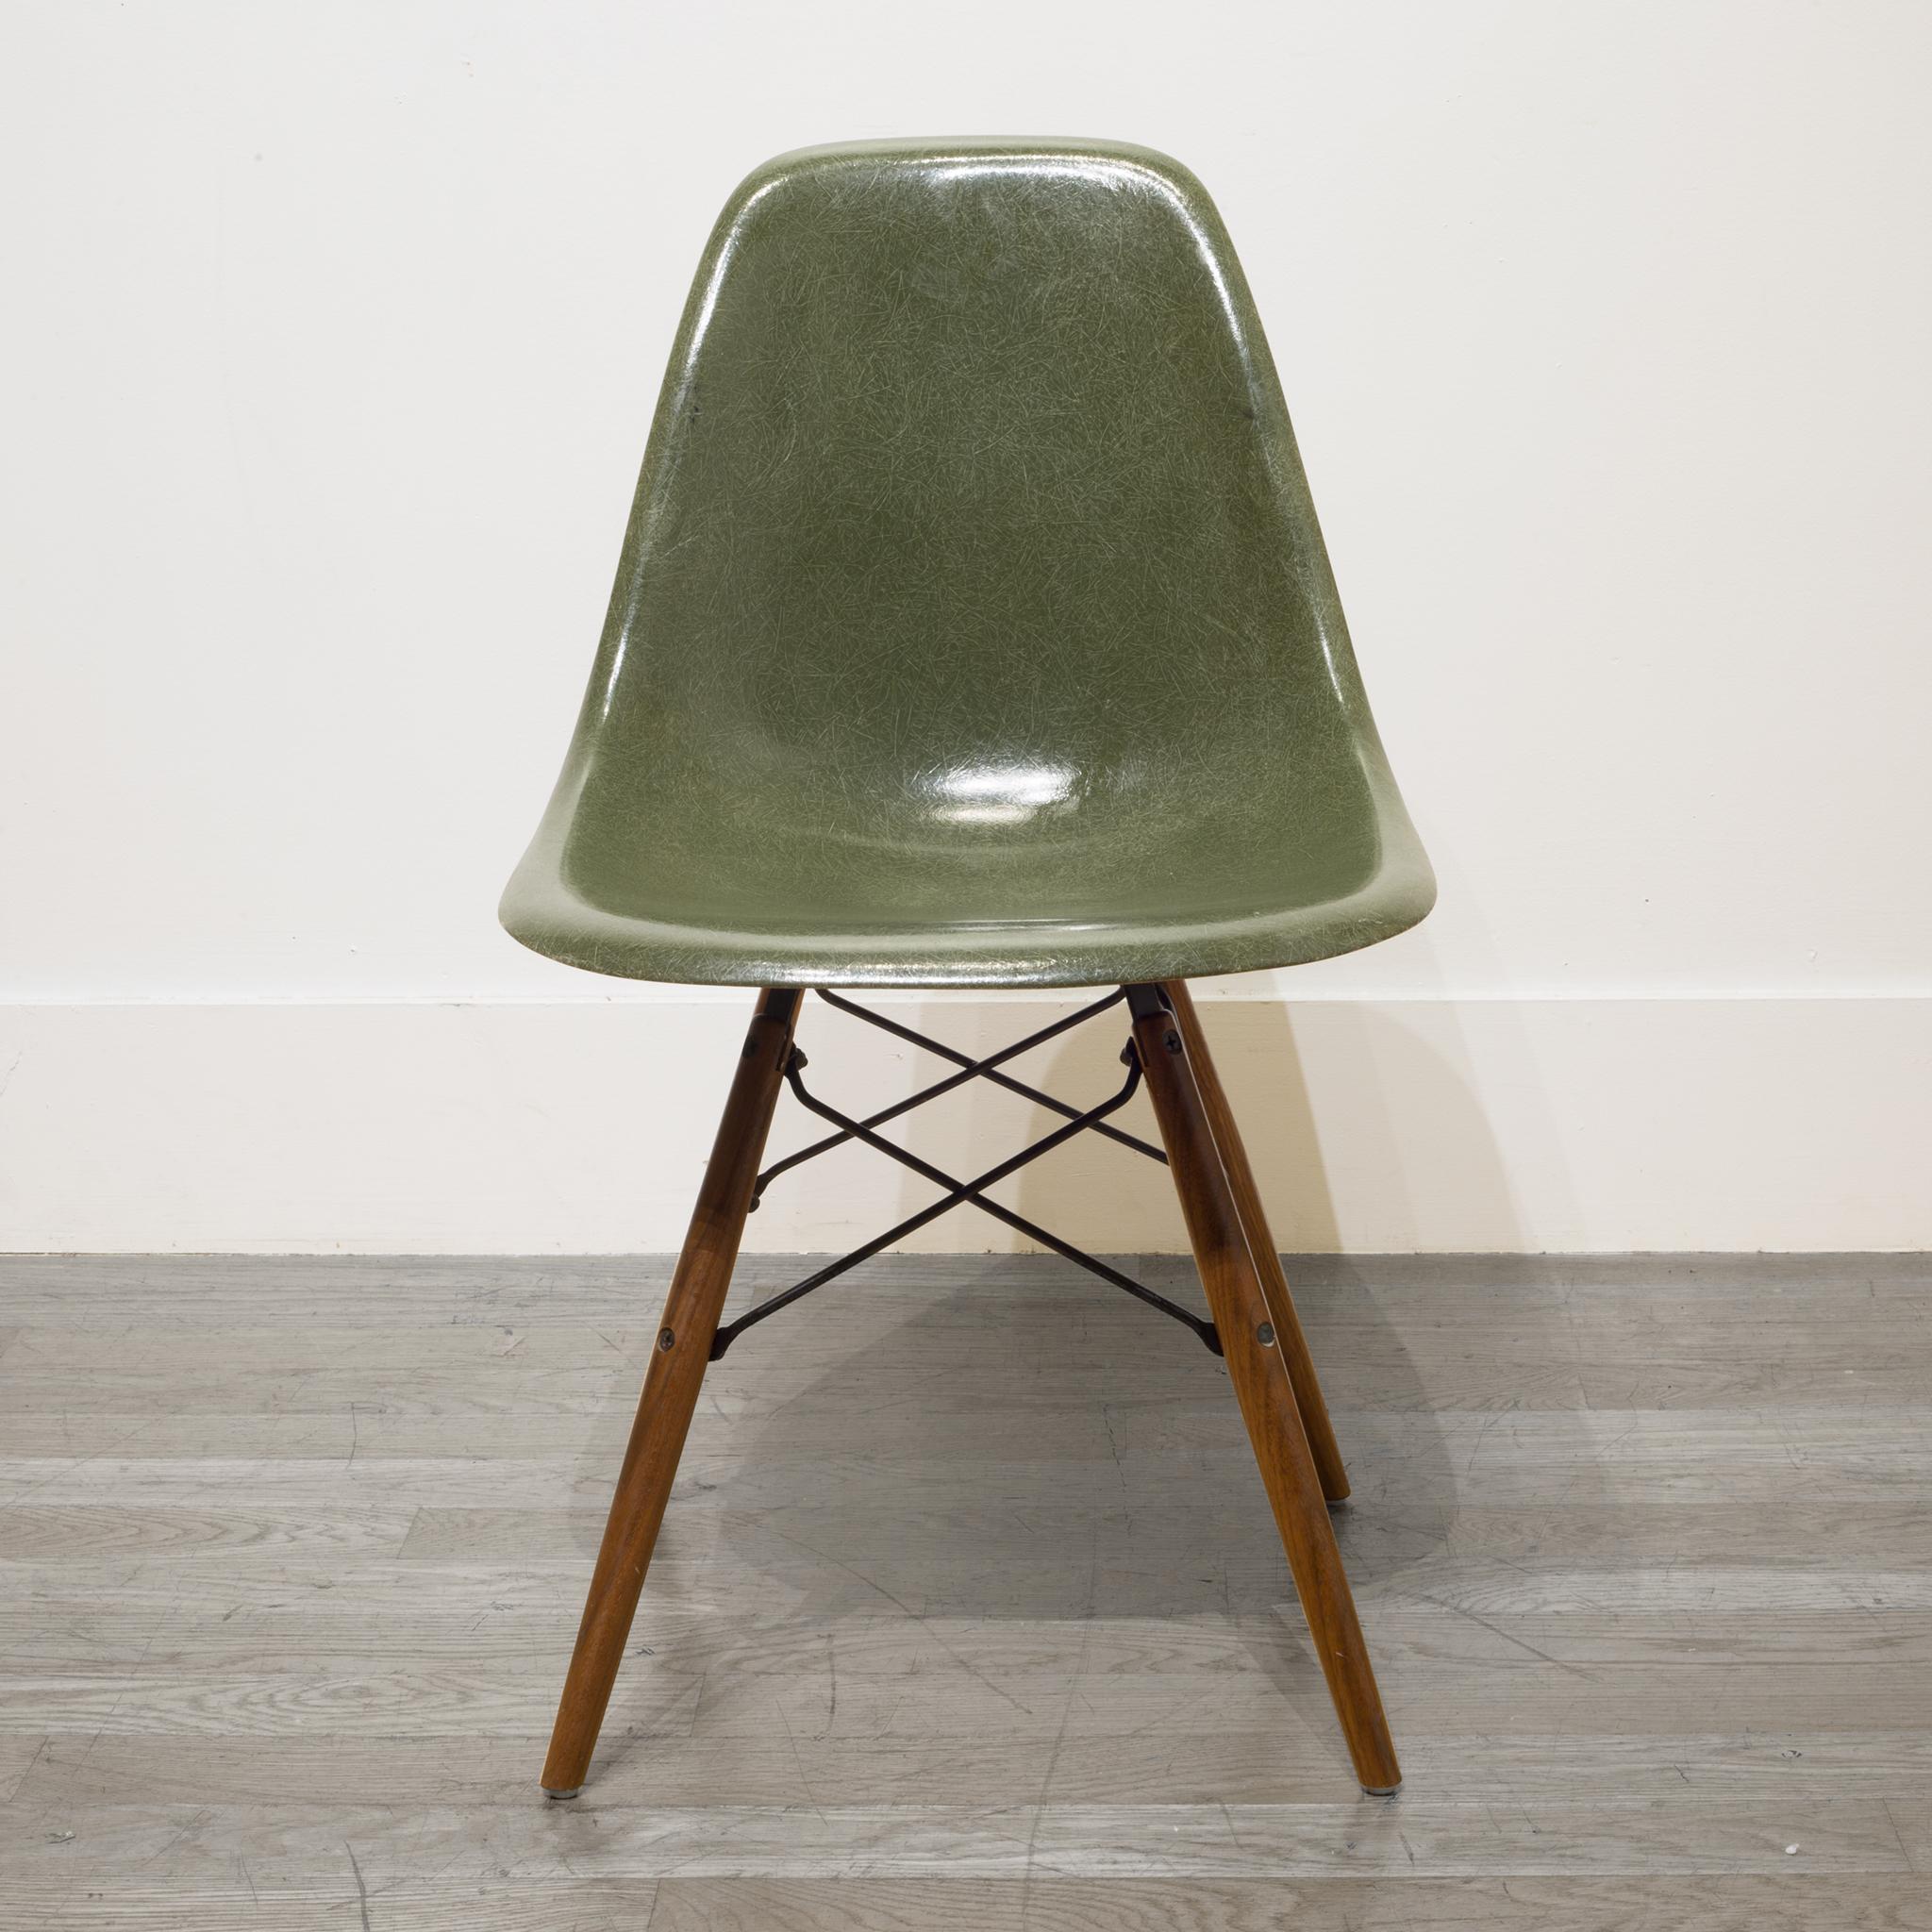 ABOUT

This is an original 1950s Eames fiberglass shell chair with original model sticker in Seafoam Green. Stamped with the 